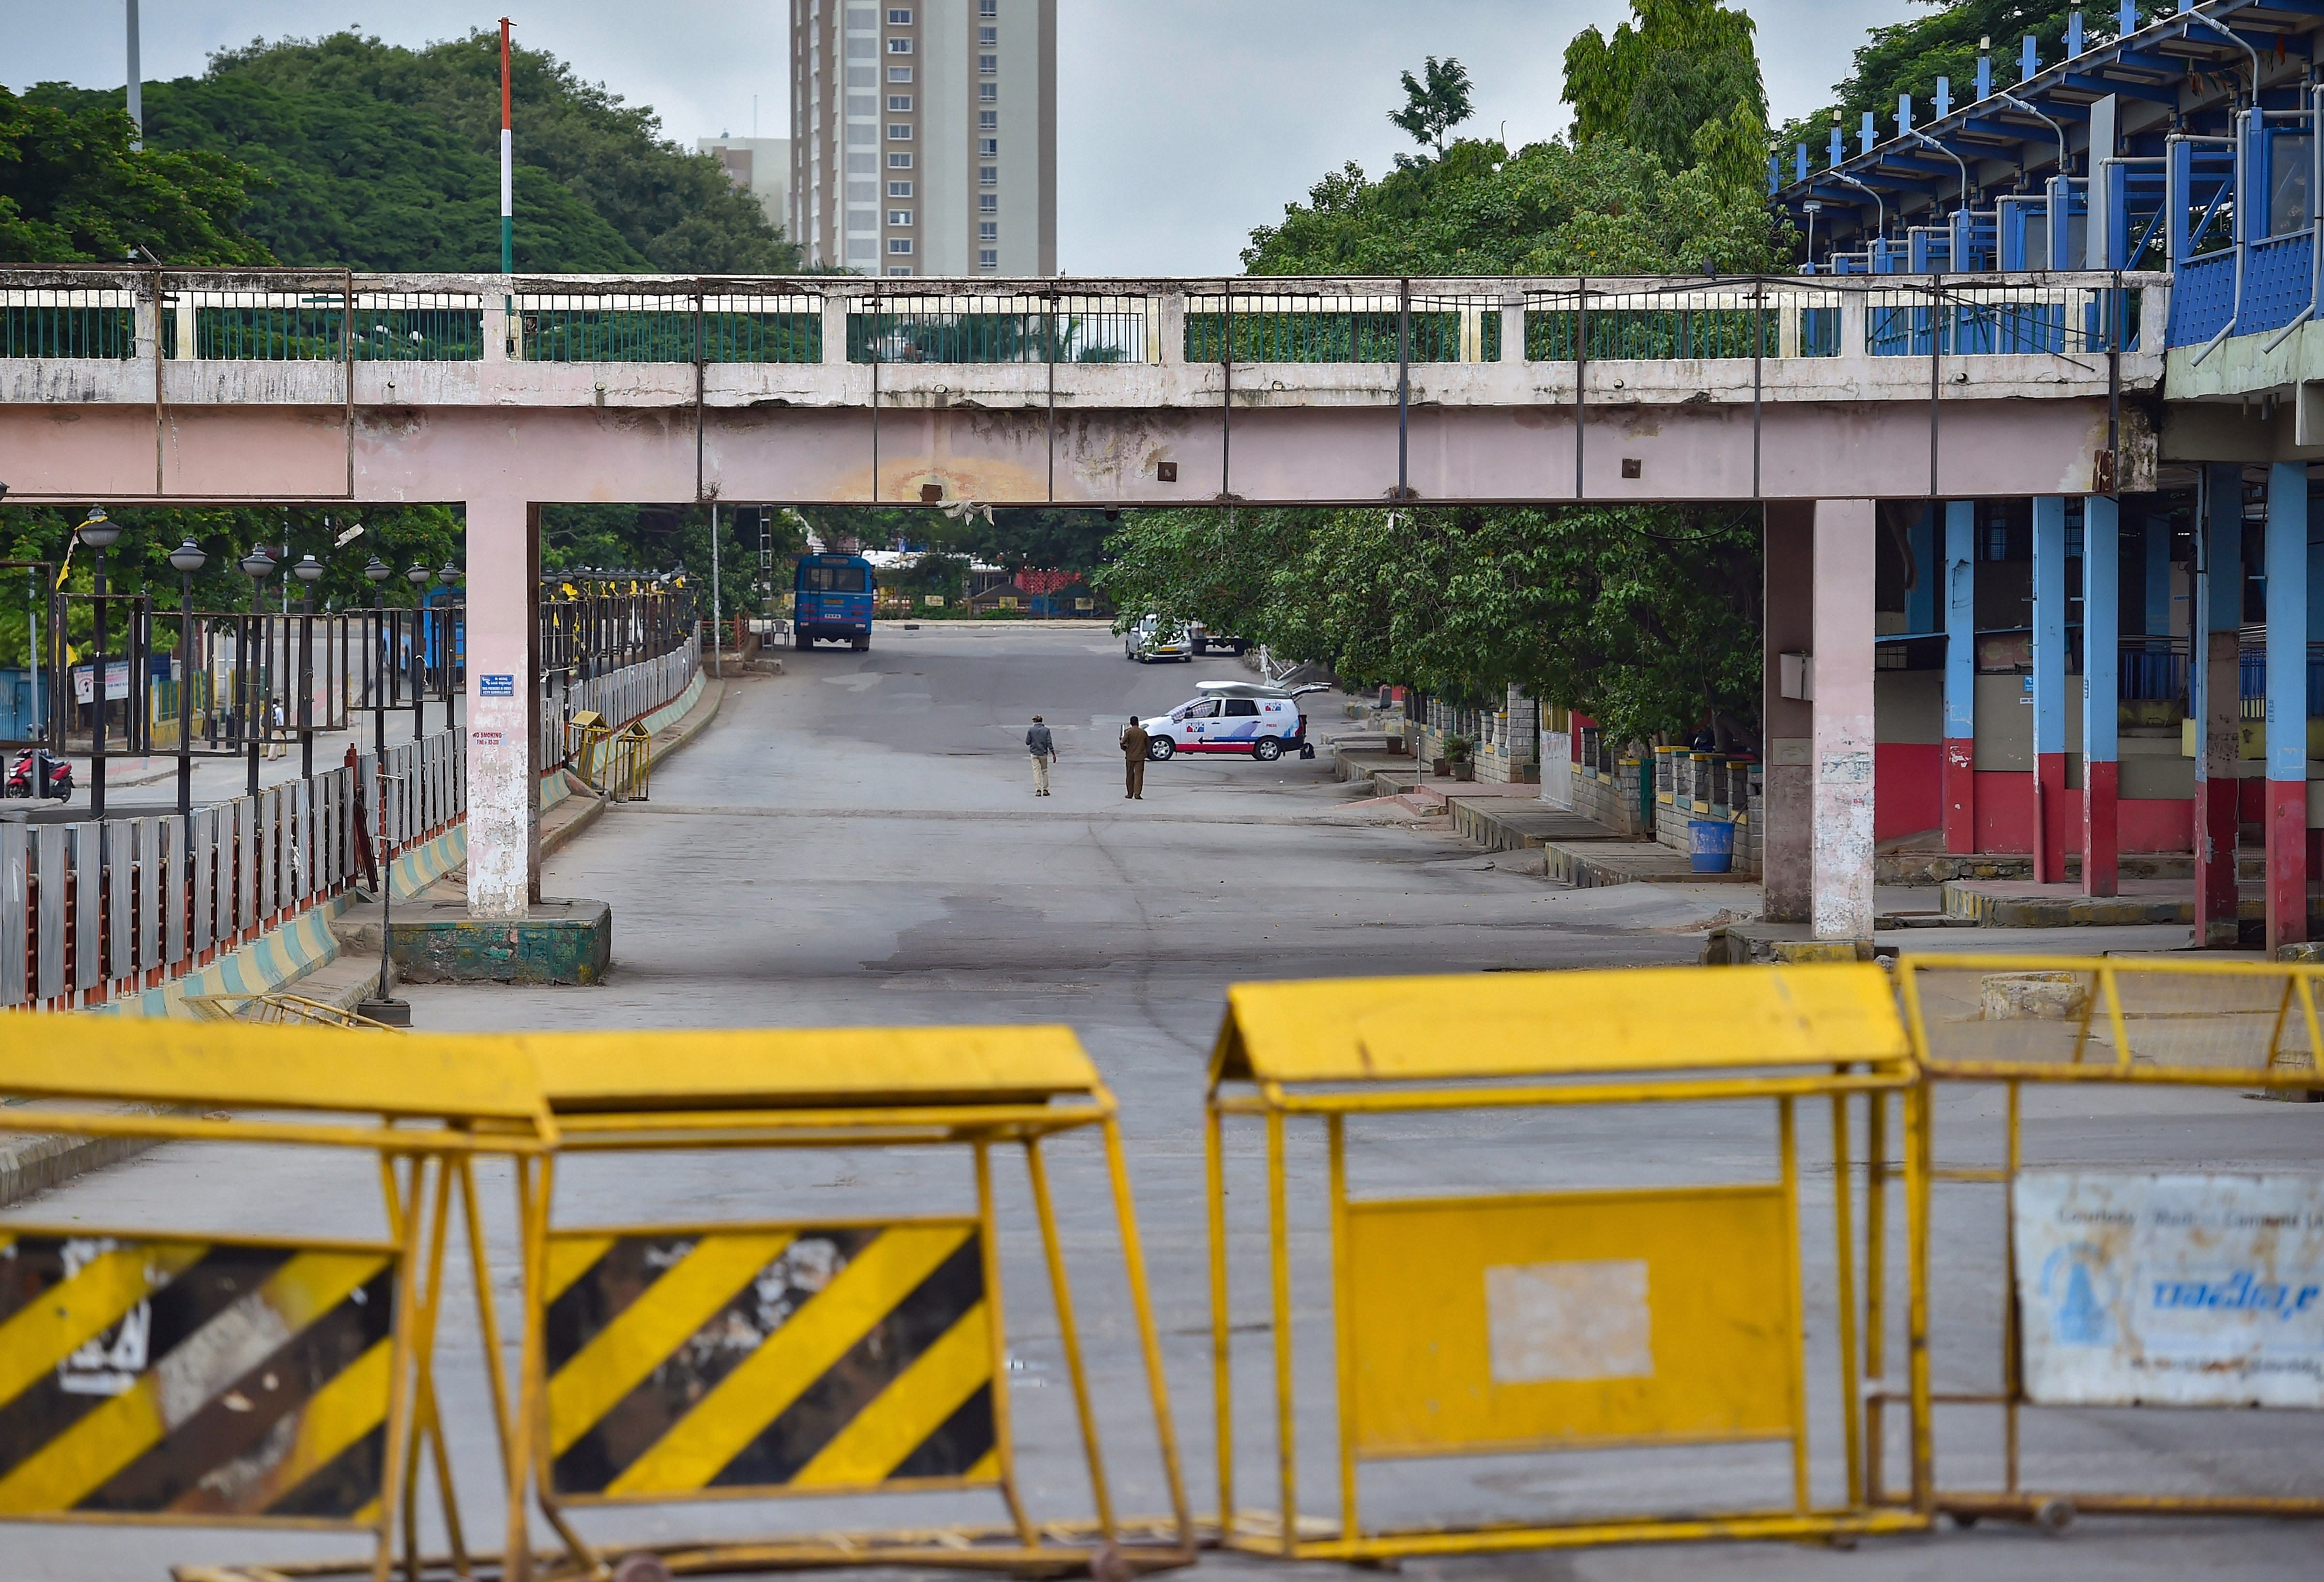 Majestic bus stand wears a deserted look during strict lockdown imposed by the authorities due to surge in COVID-19 cases, in Bengaluru, Sunday, July 5, 2020. (PTI Photo)